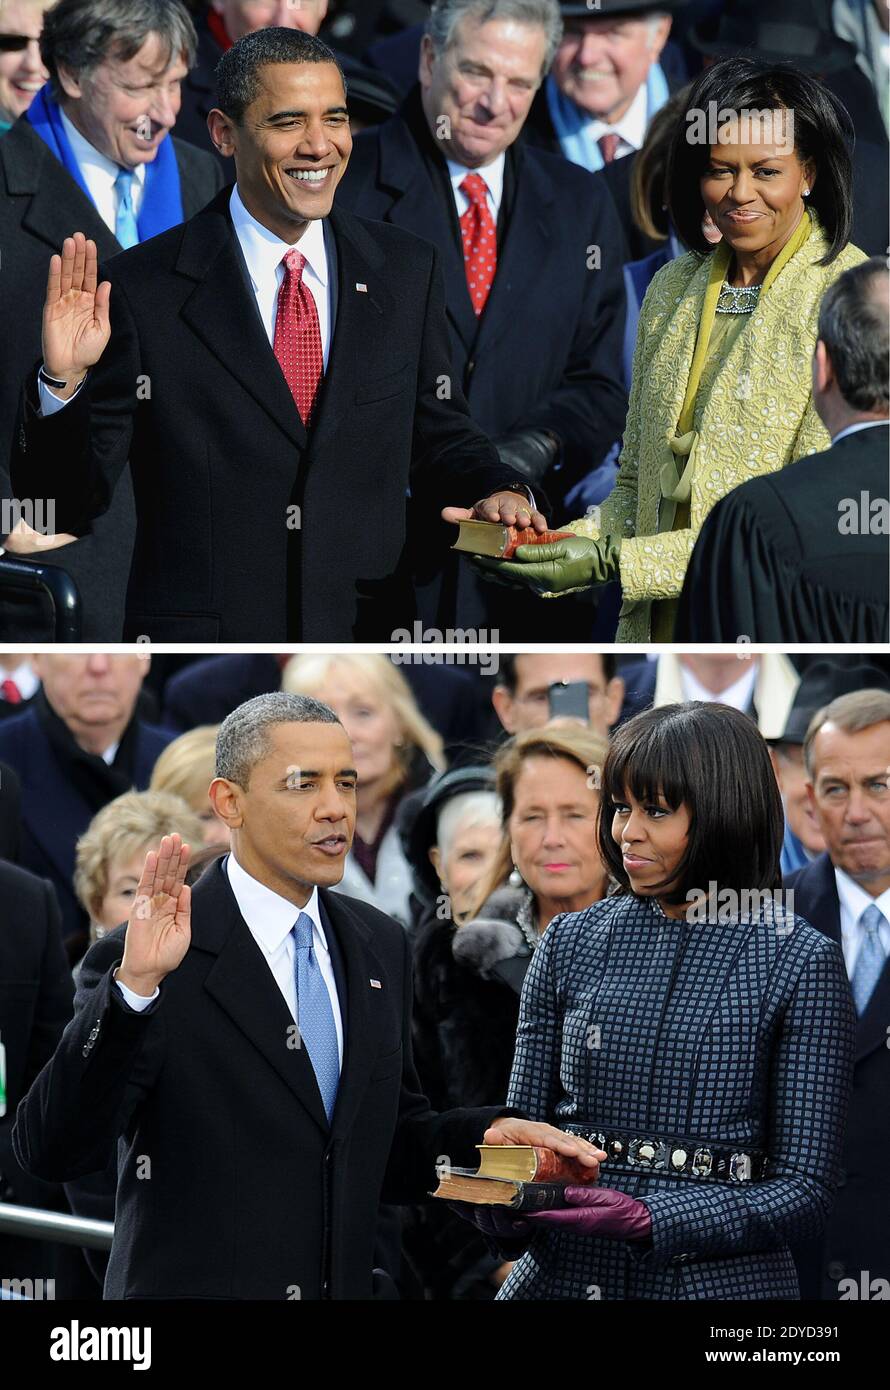 Composite image of President Barack Obama's first (up) and second inaugurations alongside First Lady Michelle in Washington, DC, USA, on January 20, 2009 and January 21, 2013. Photo by Hahn-JMP-Douliery/ABACAPRESS.COM Stock Photo